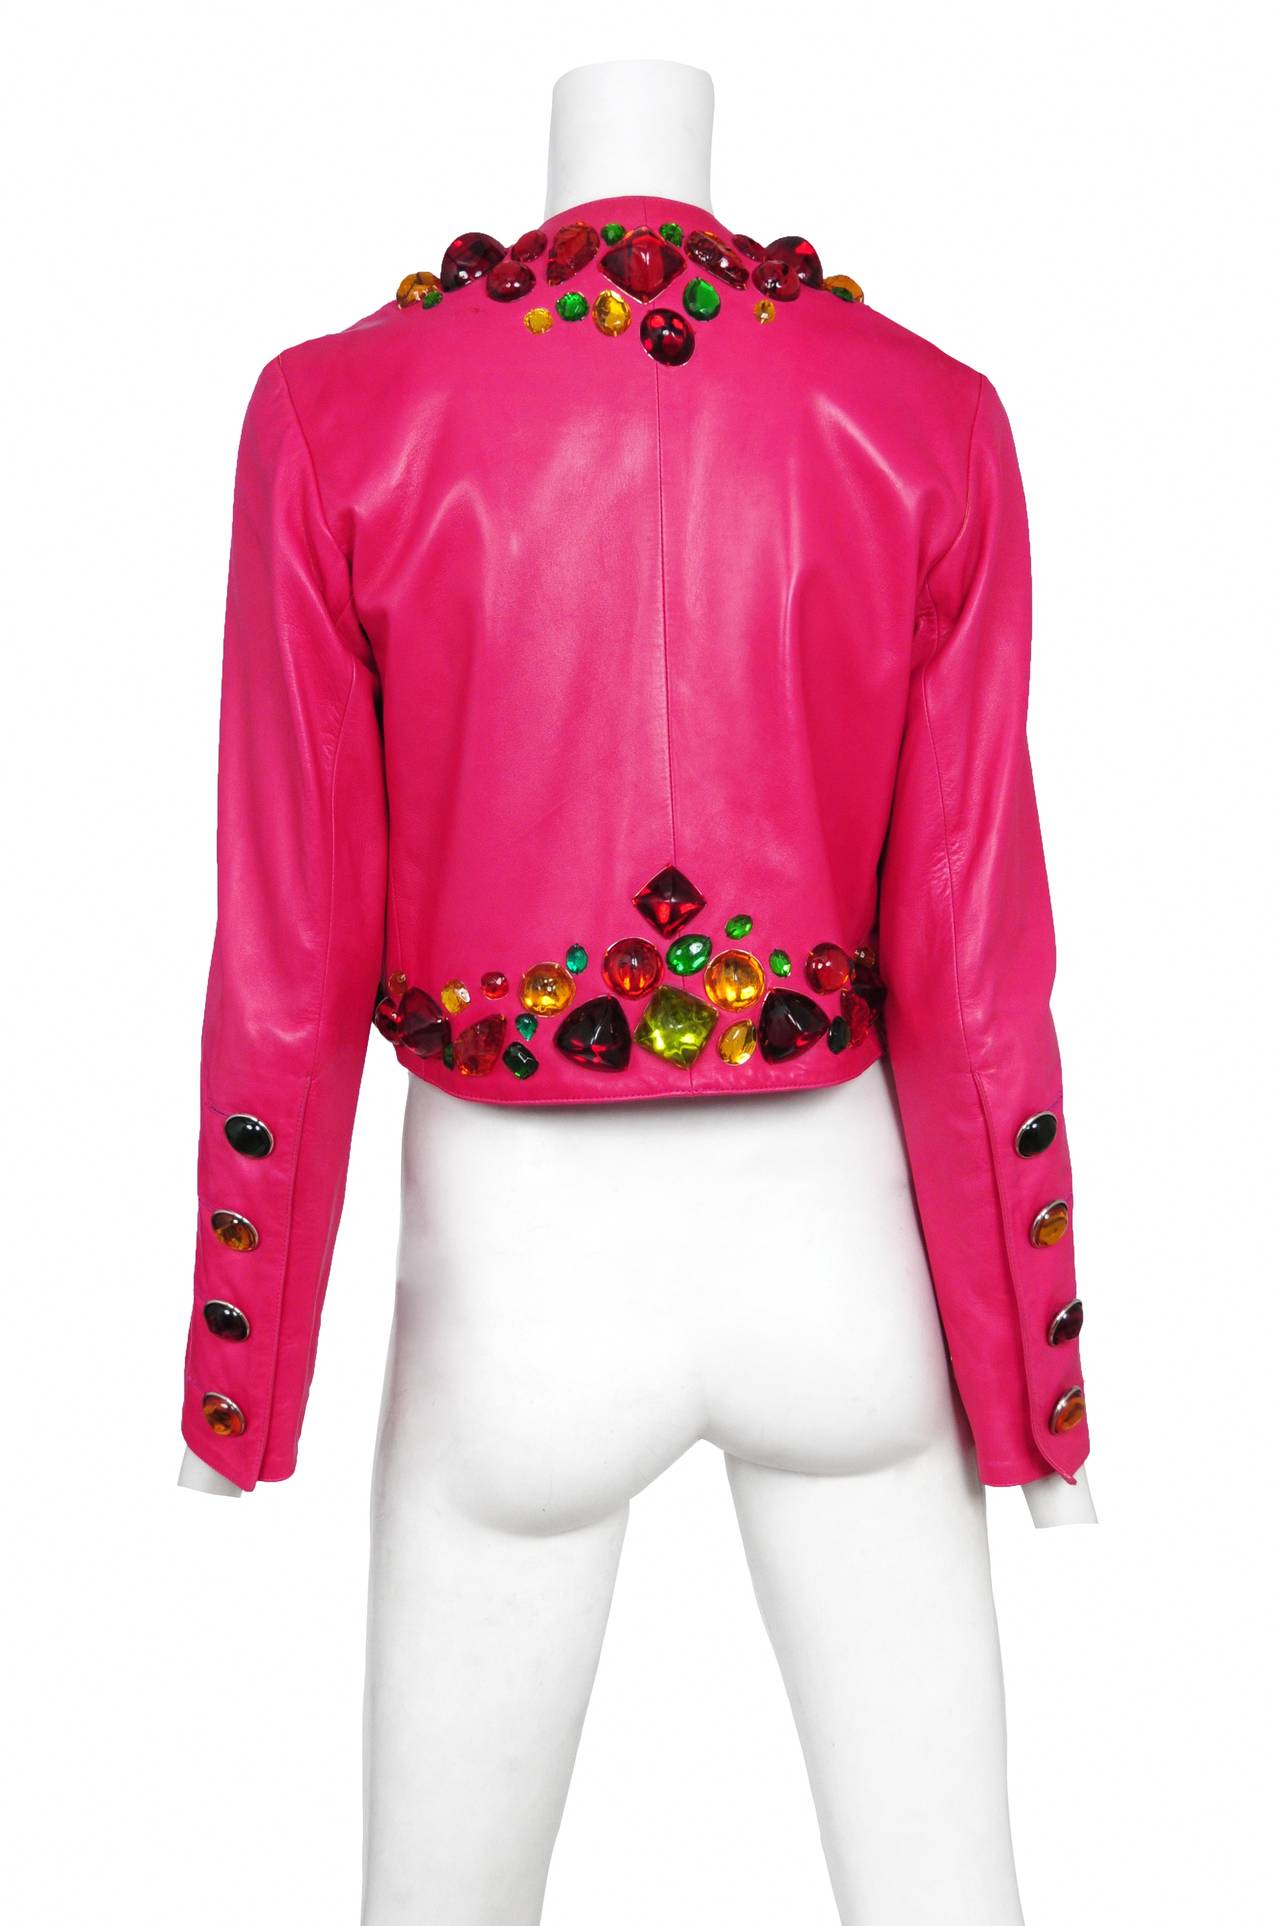 Vintage Yves Saint Laurent subtle leather jacket in vibrant pink with multi color  oversized acrylic gemstones at edges and cuffs.